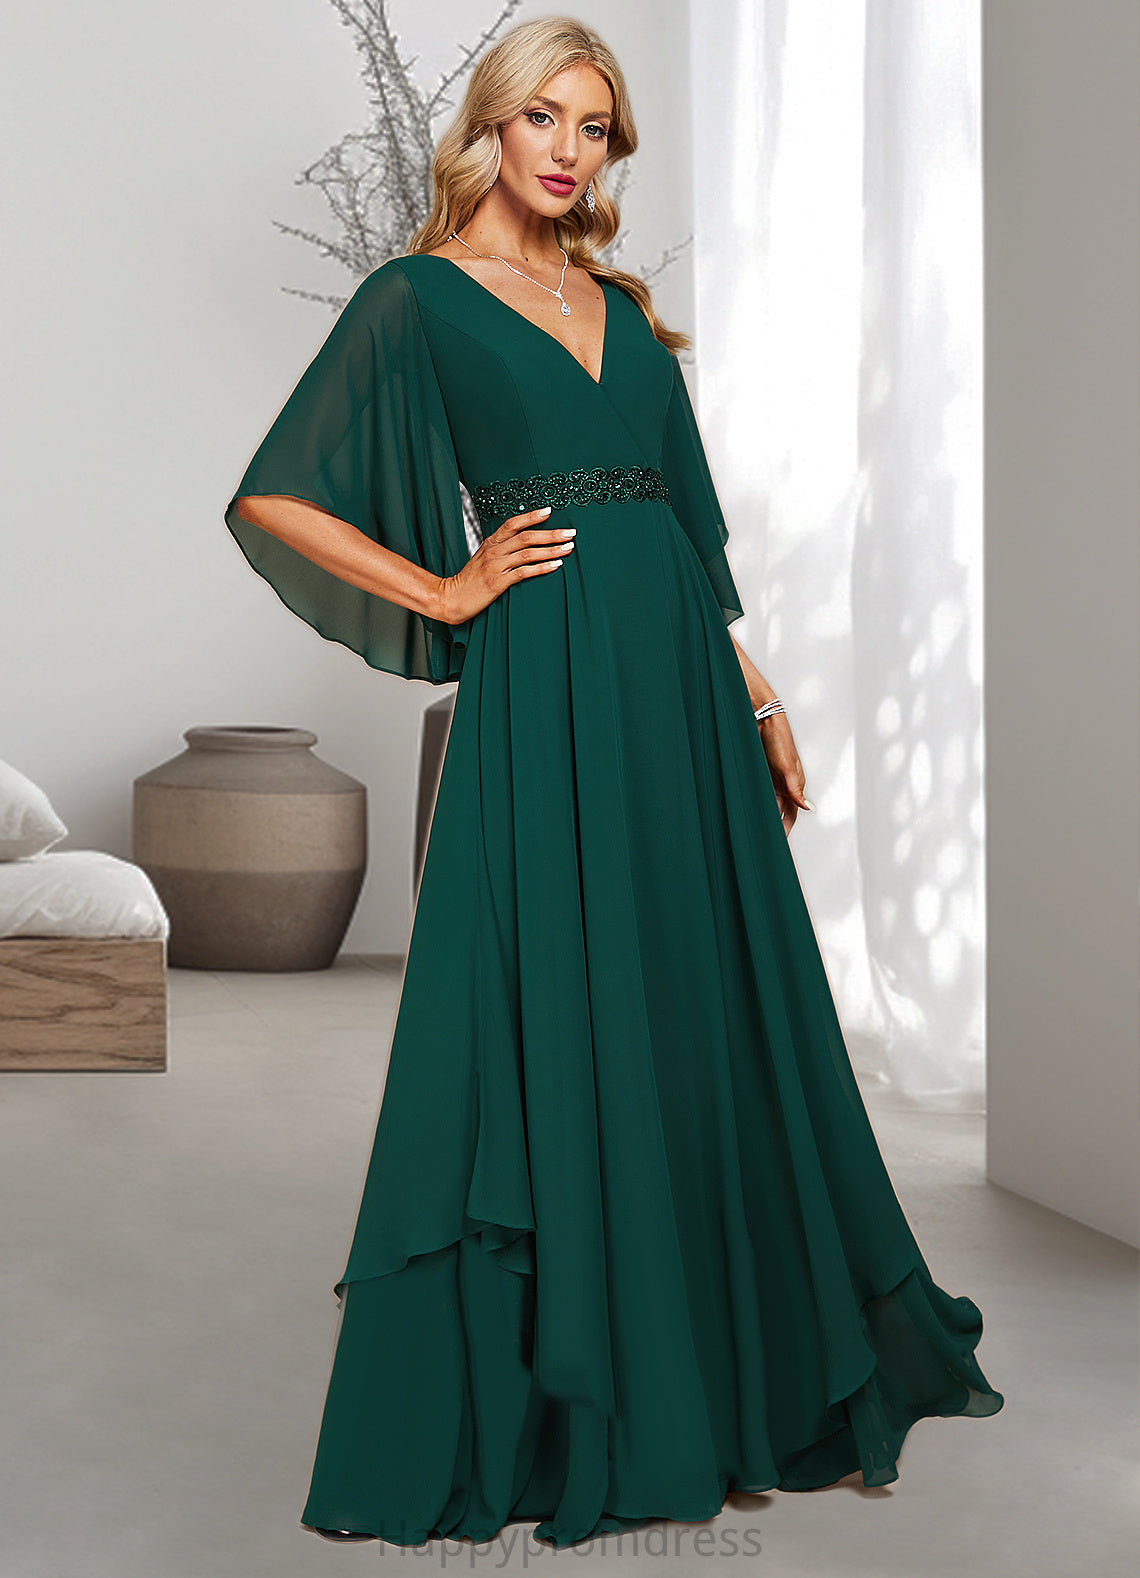 Lily A-line V-Neck Floor-Length Chiffon Mother of the Bride Dress With Beading Appliques Lace Sequins XXSP0021682